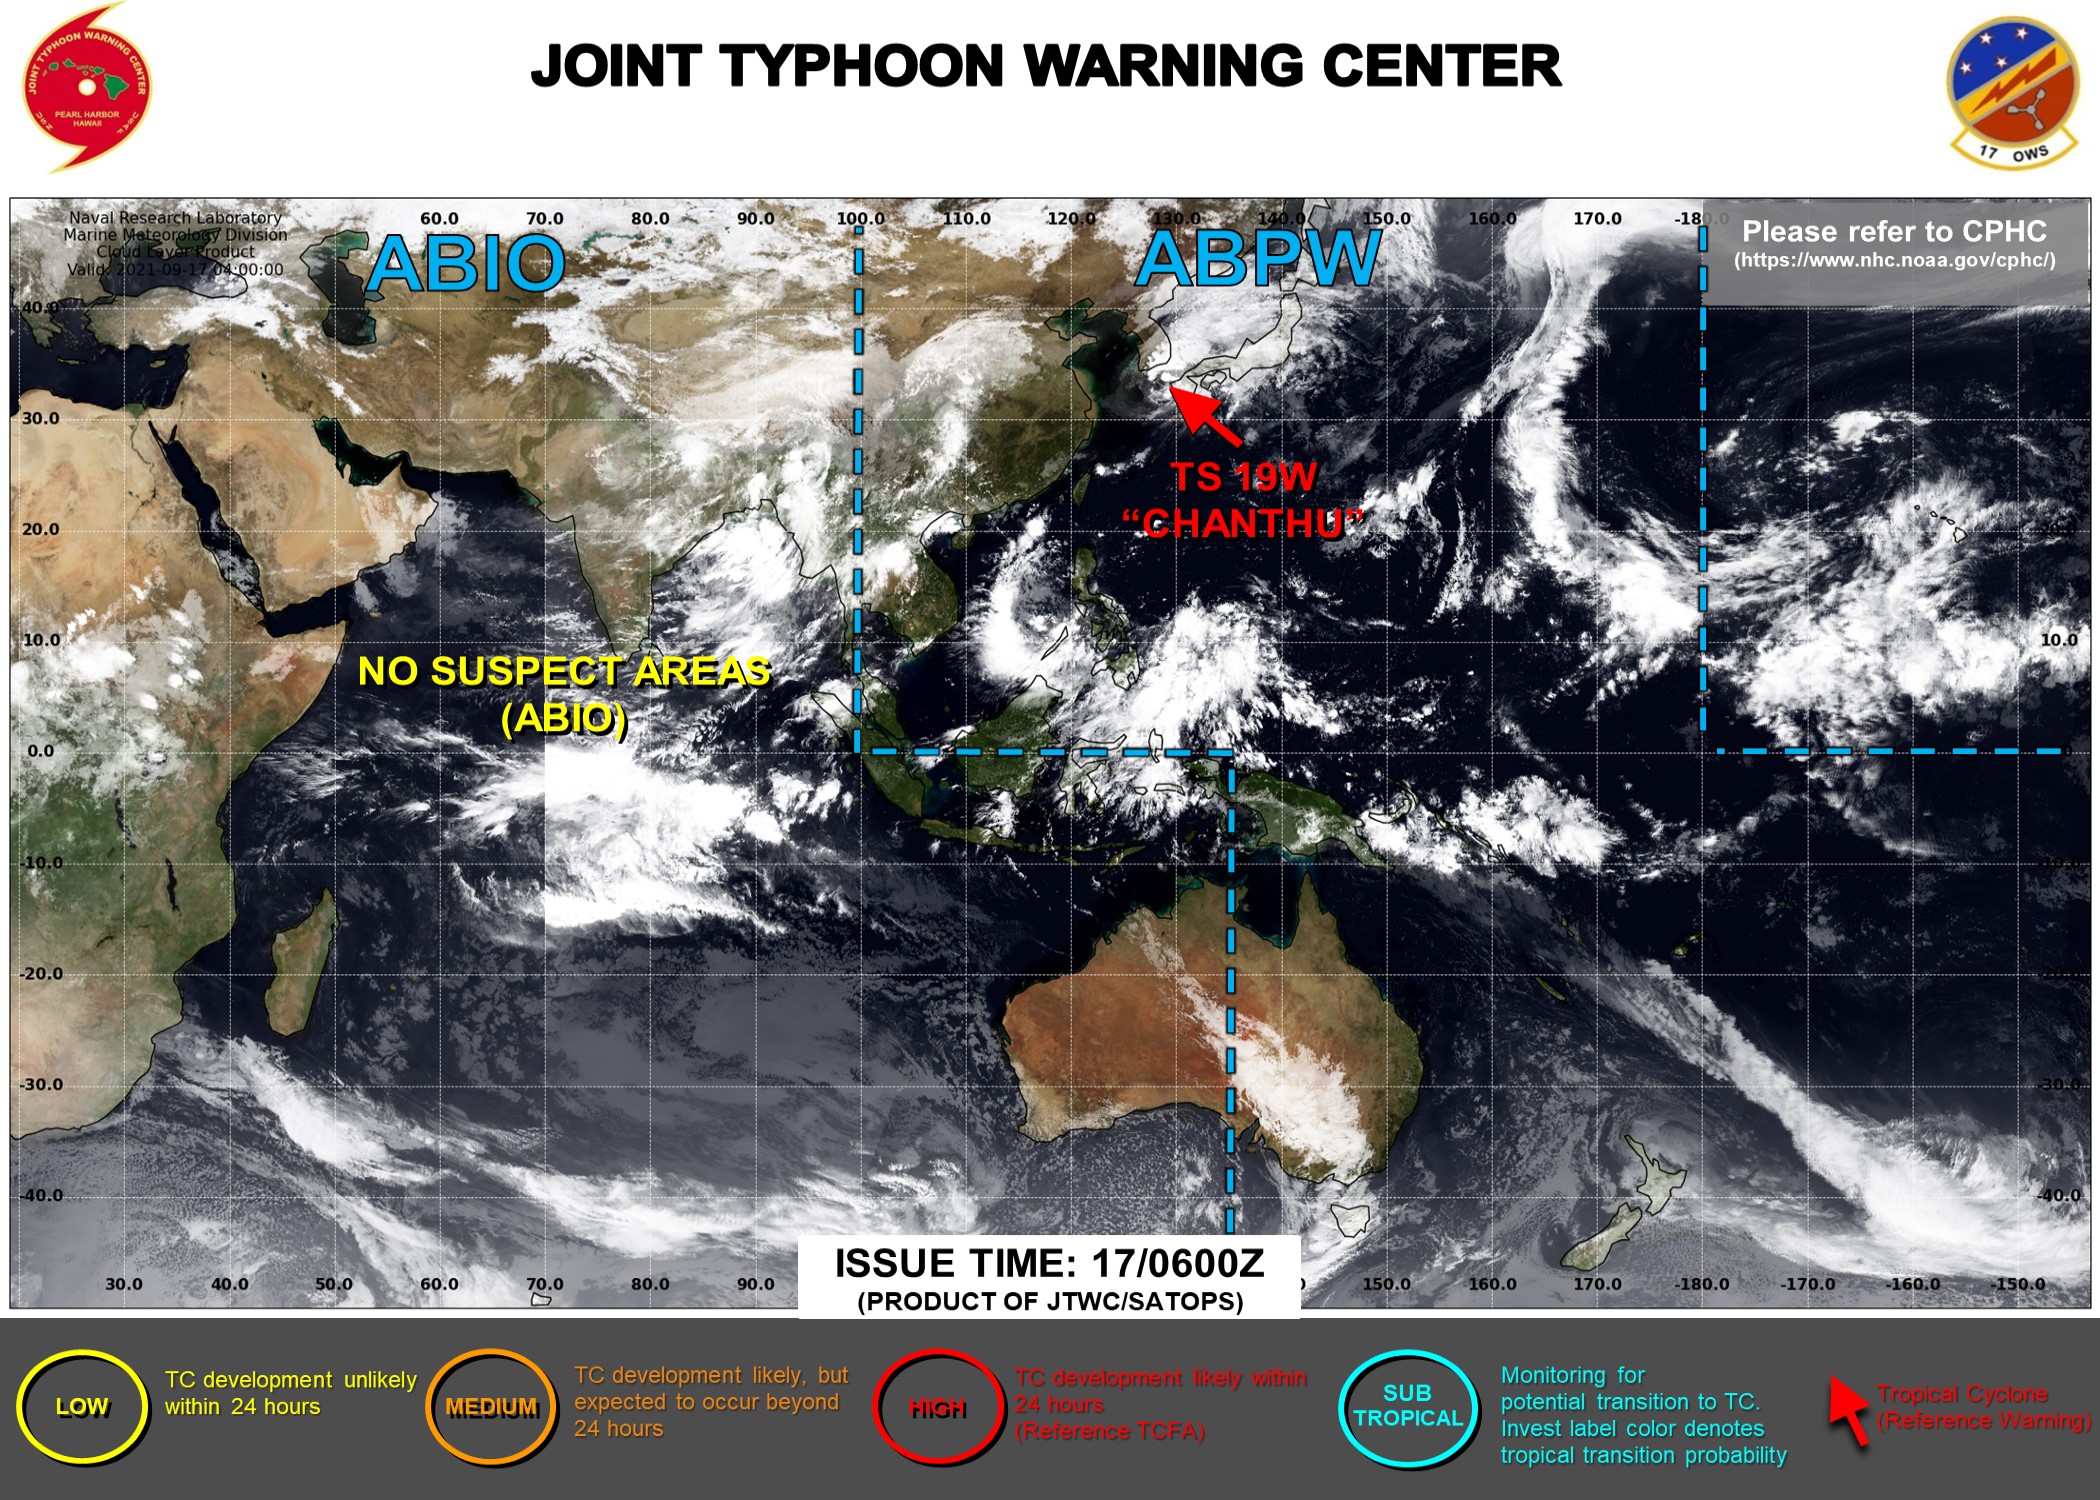 Western Pacific: 19W(CHANTHU) monitored for the past 12 days and still there//Atlantic: Tropical Cyclone Formation Alert issued again for 96L,17/09utc